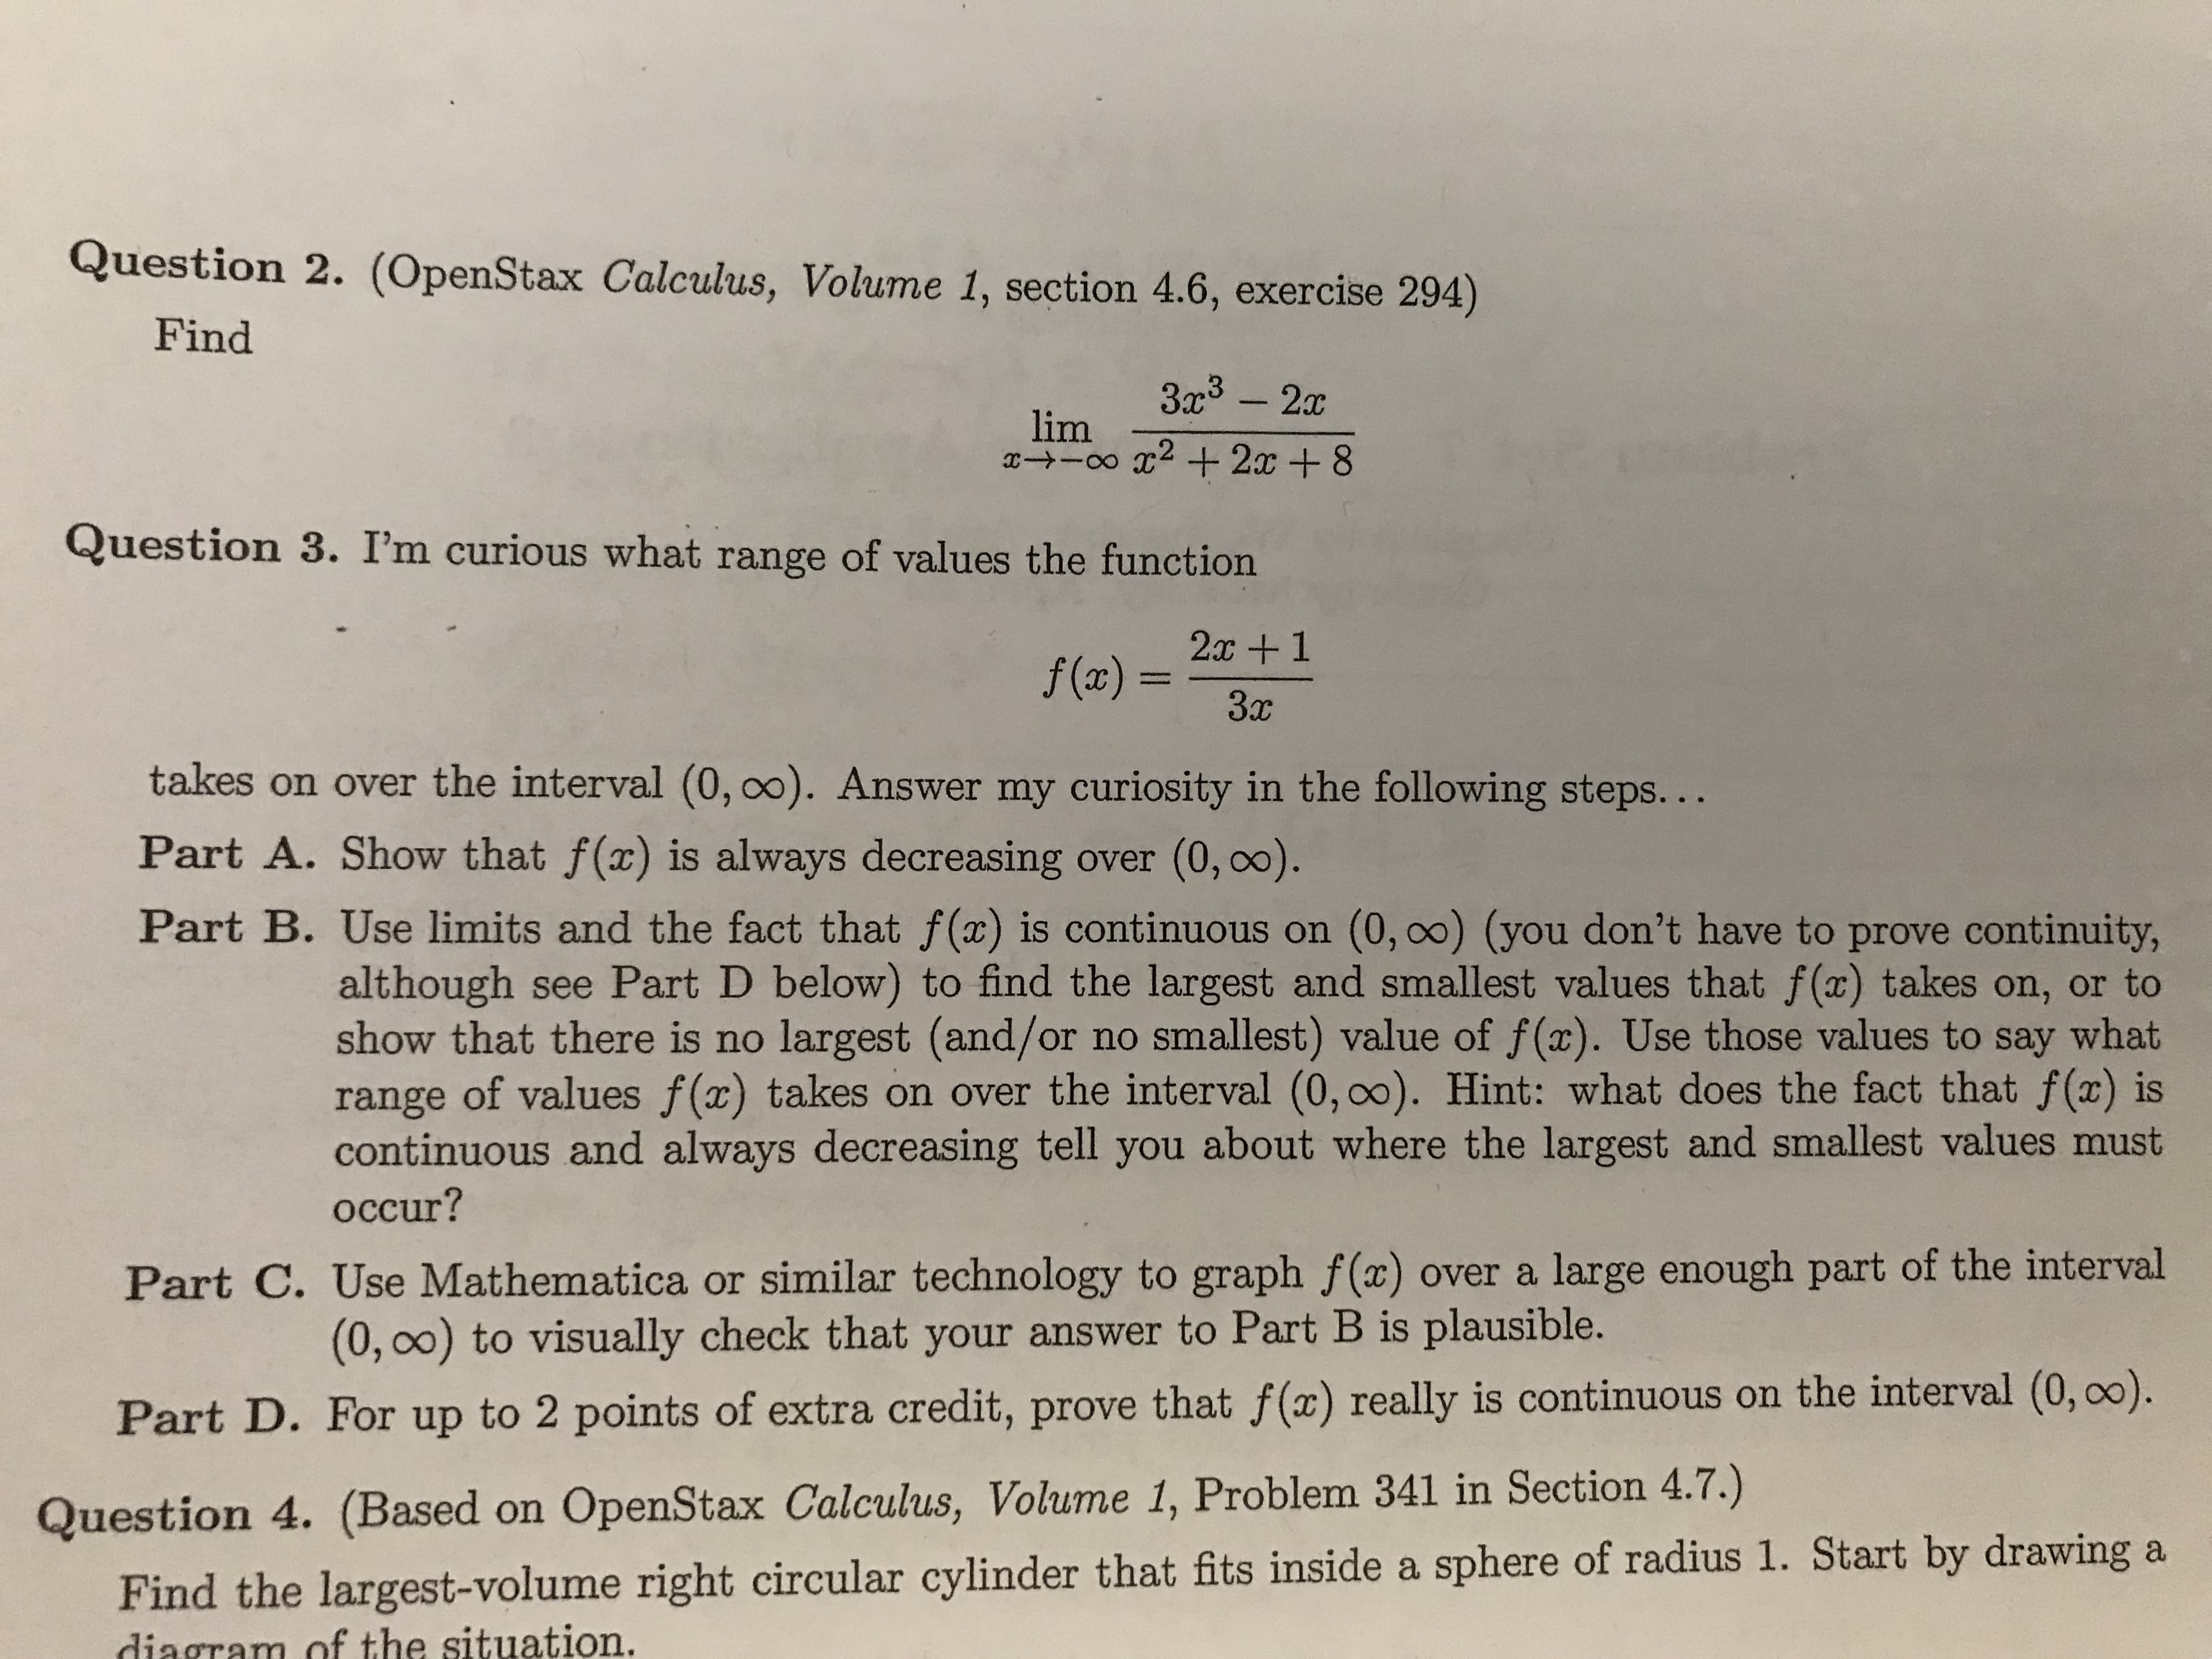 Question 2. (OpenStax Calculus, Volume 1, section 4.6, exercise 294)
Find
3a3 -2
lim
Question 3. I'm curious what range of values the function
2c+1
takes on over the interval (0, 00). Answer my curiosity in the following steps...
Part A. Show that f (x) is always decreasing over (0, oo).
Part B. Use limits and the fact that f(x) is continuous on (0, 00) (you don't have to prove continuity,
although see Part D below) to find the largest and smallest values that f (x) takes on, or to
show that there is no largest (and/or no smallest) value of f(x). Use those values to say what
range of values f(x) takes on over the interval (0,00). Hint: what does the fact that f(x) is
continuous and always decreasing tell you about where the largest and smallest values must
occur?
Part C. Use Mathematica or similar technology to graph f(x) over a large enough part of the interval
(0, 0o) to visually check that your answer to Part B is plausible.
Par
t D. For up to 2 points of extra credit, prove that f(a) really is continuous on the interval (0, 00).
Question 4. (Based on OpenStax Calculus, Volume 1, Problem 341 in Section 4.7.)
Find the largest-volume right circular cylinder that fits inside a sphere of radius 1. Start by drawing a
diagram of the situation
